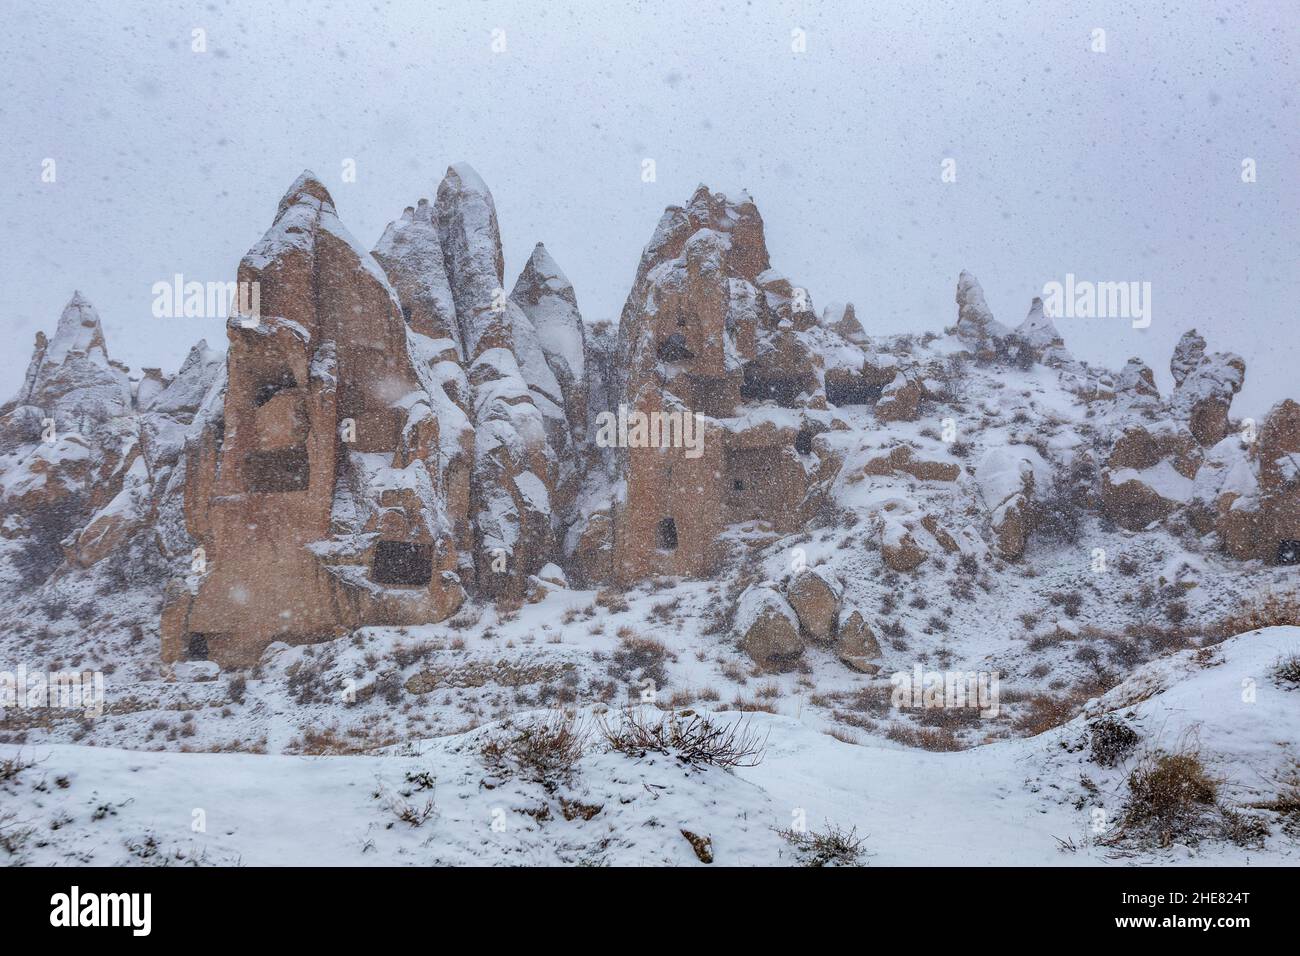 Heavy snowfall in Cappadocia. Large flakes of snow fall from the sky and cover the entire incredible landscape Stock Photo